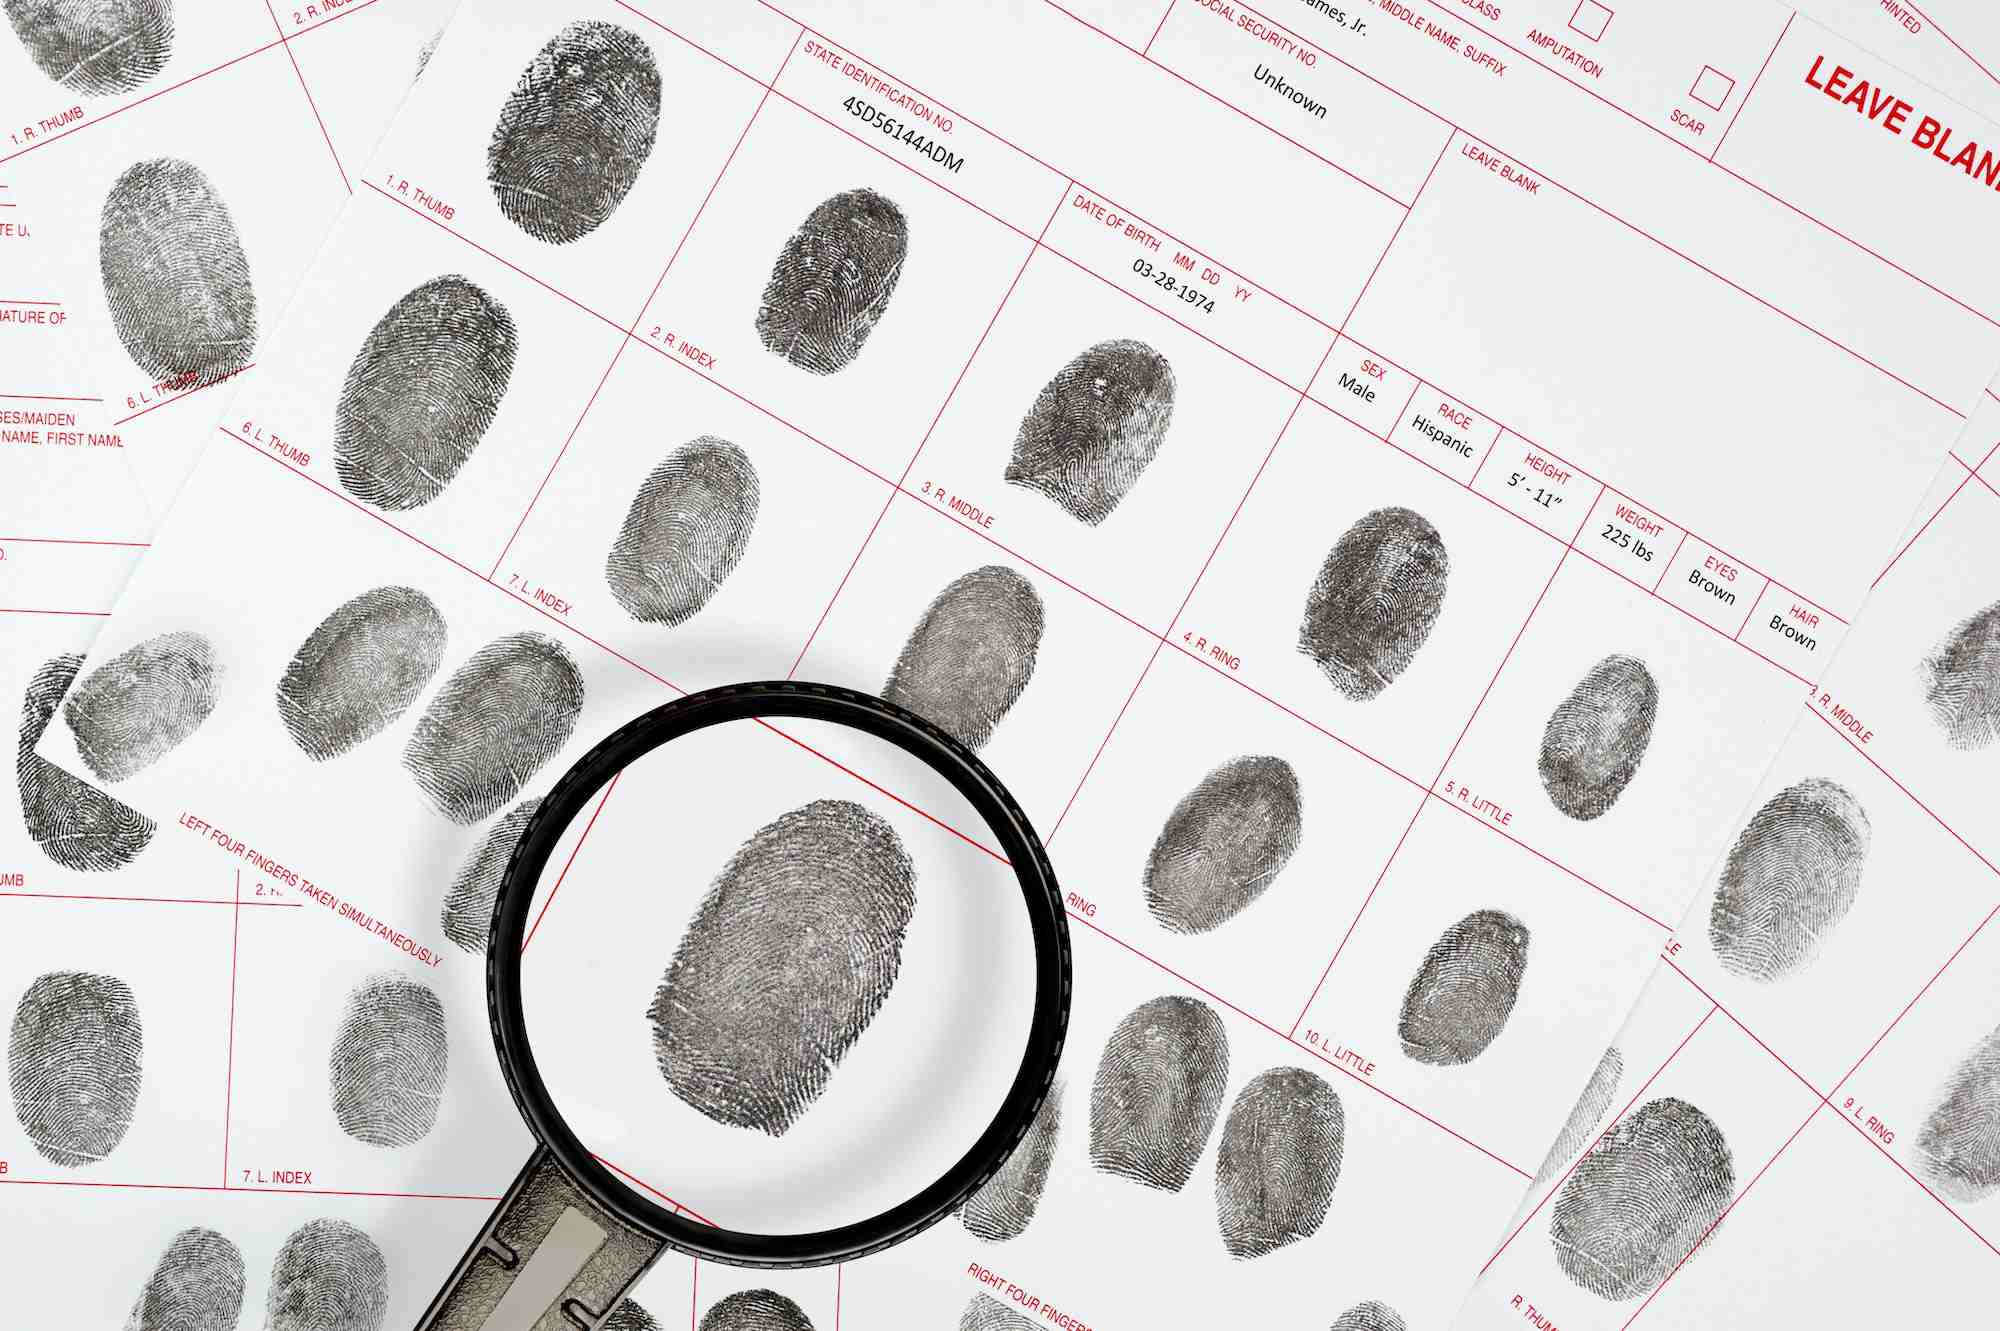 Some fingerprints showing from magnified glass